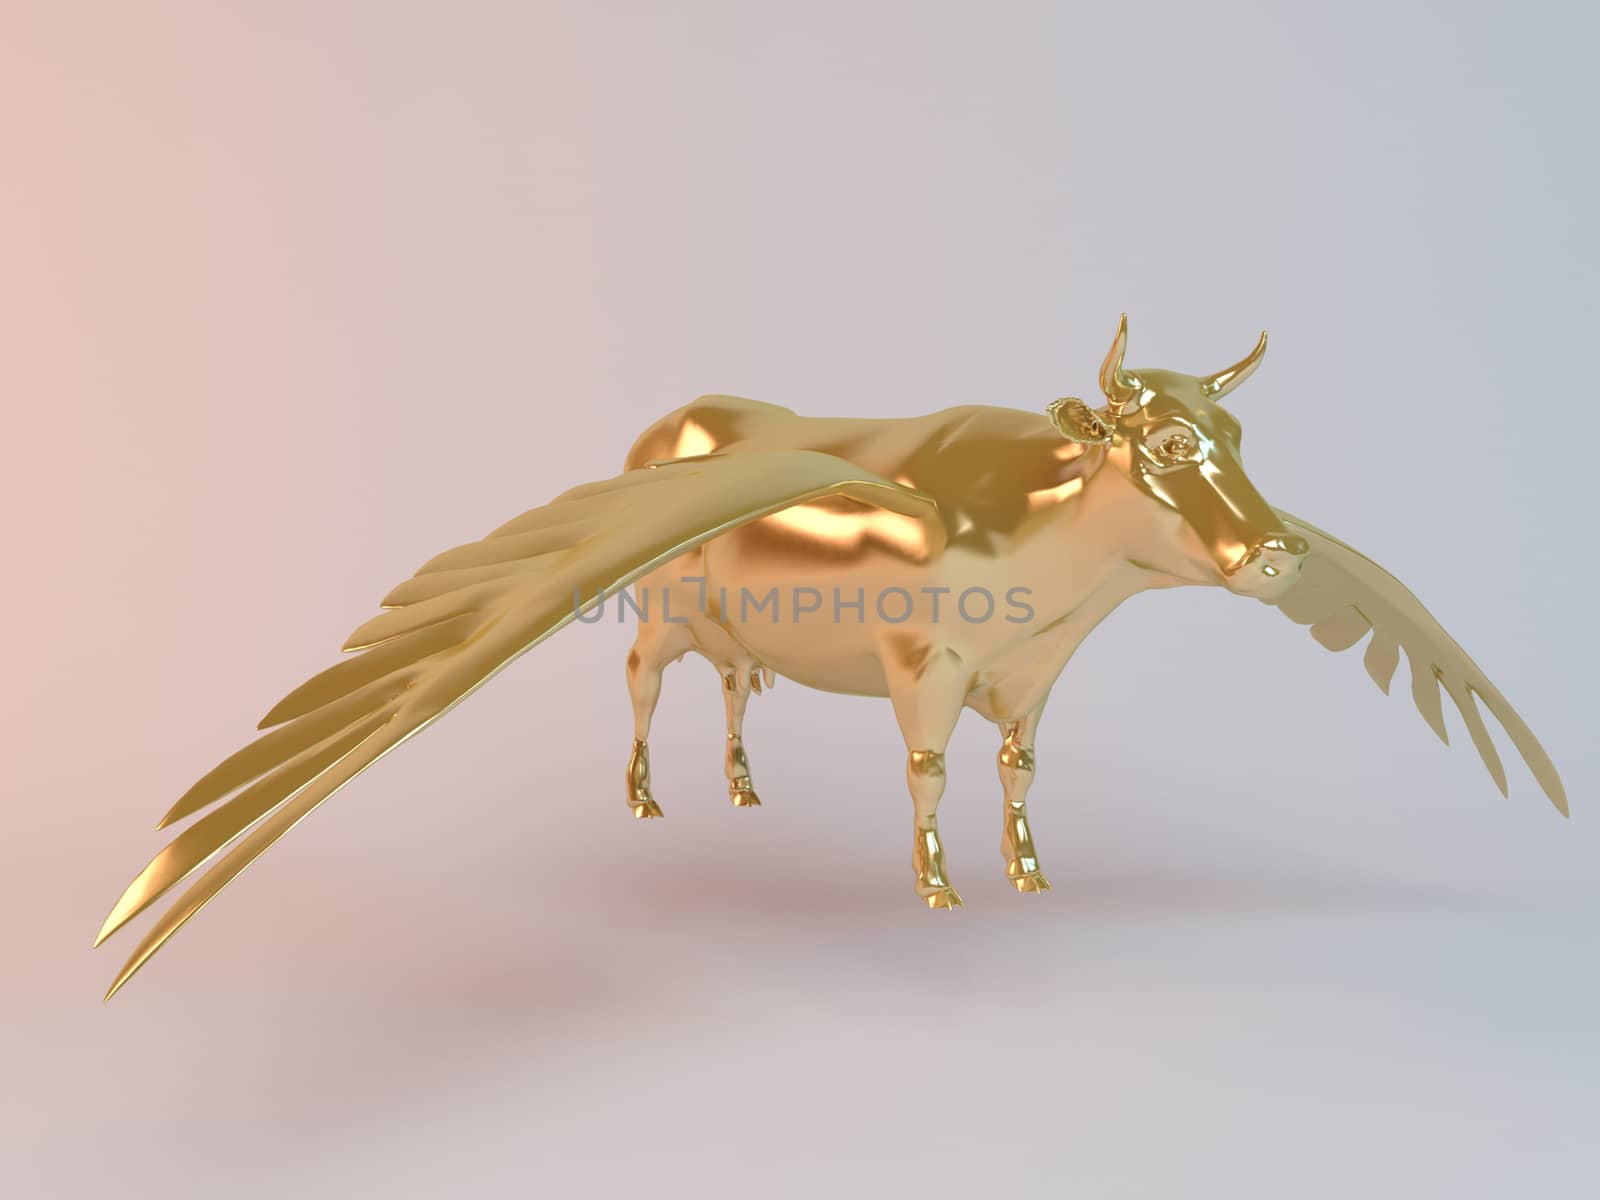 Golden 3D flying animal cow inside a stage with high render quality to be used as a logo, medal, symbol, shape, emblem, icon, business, geometric, label or any other use